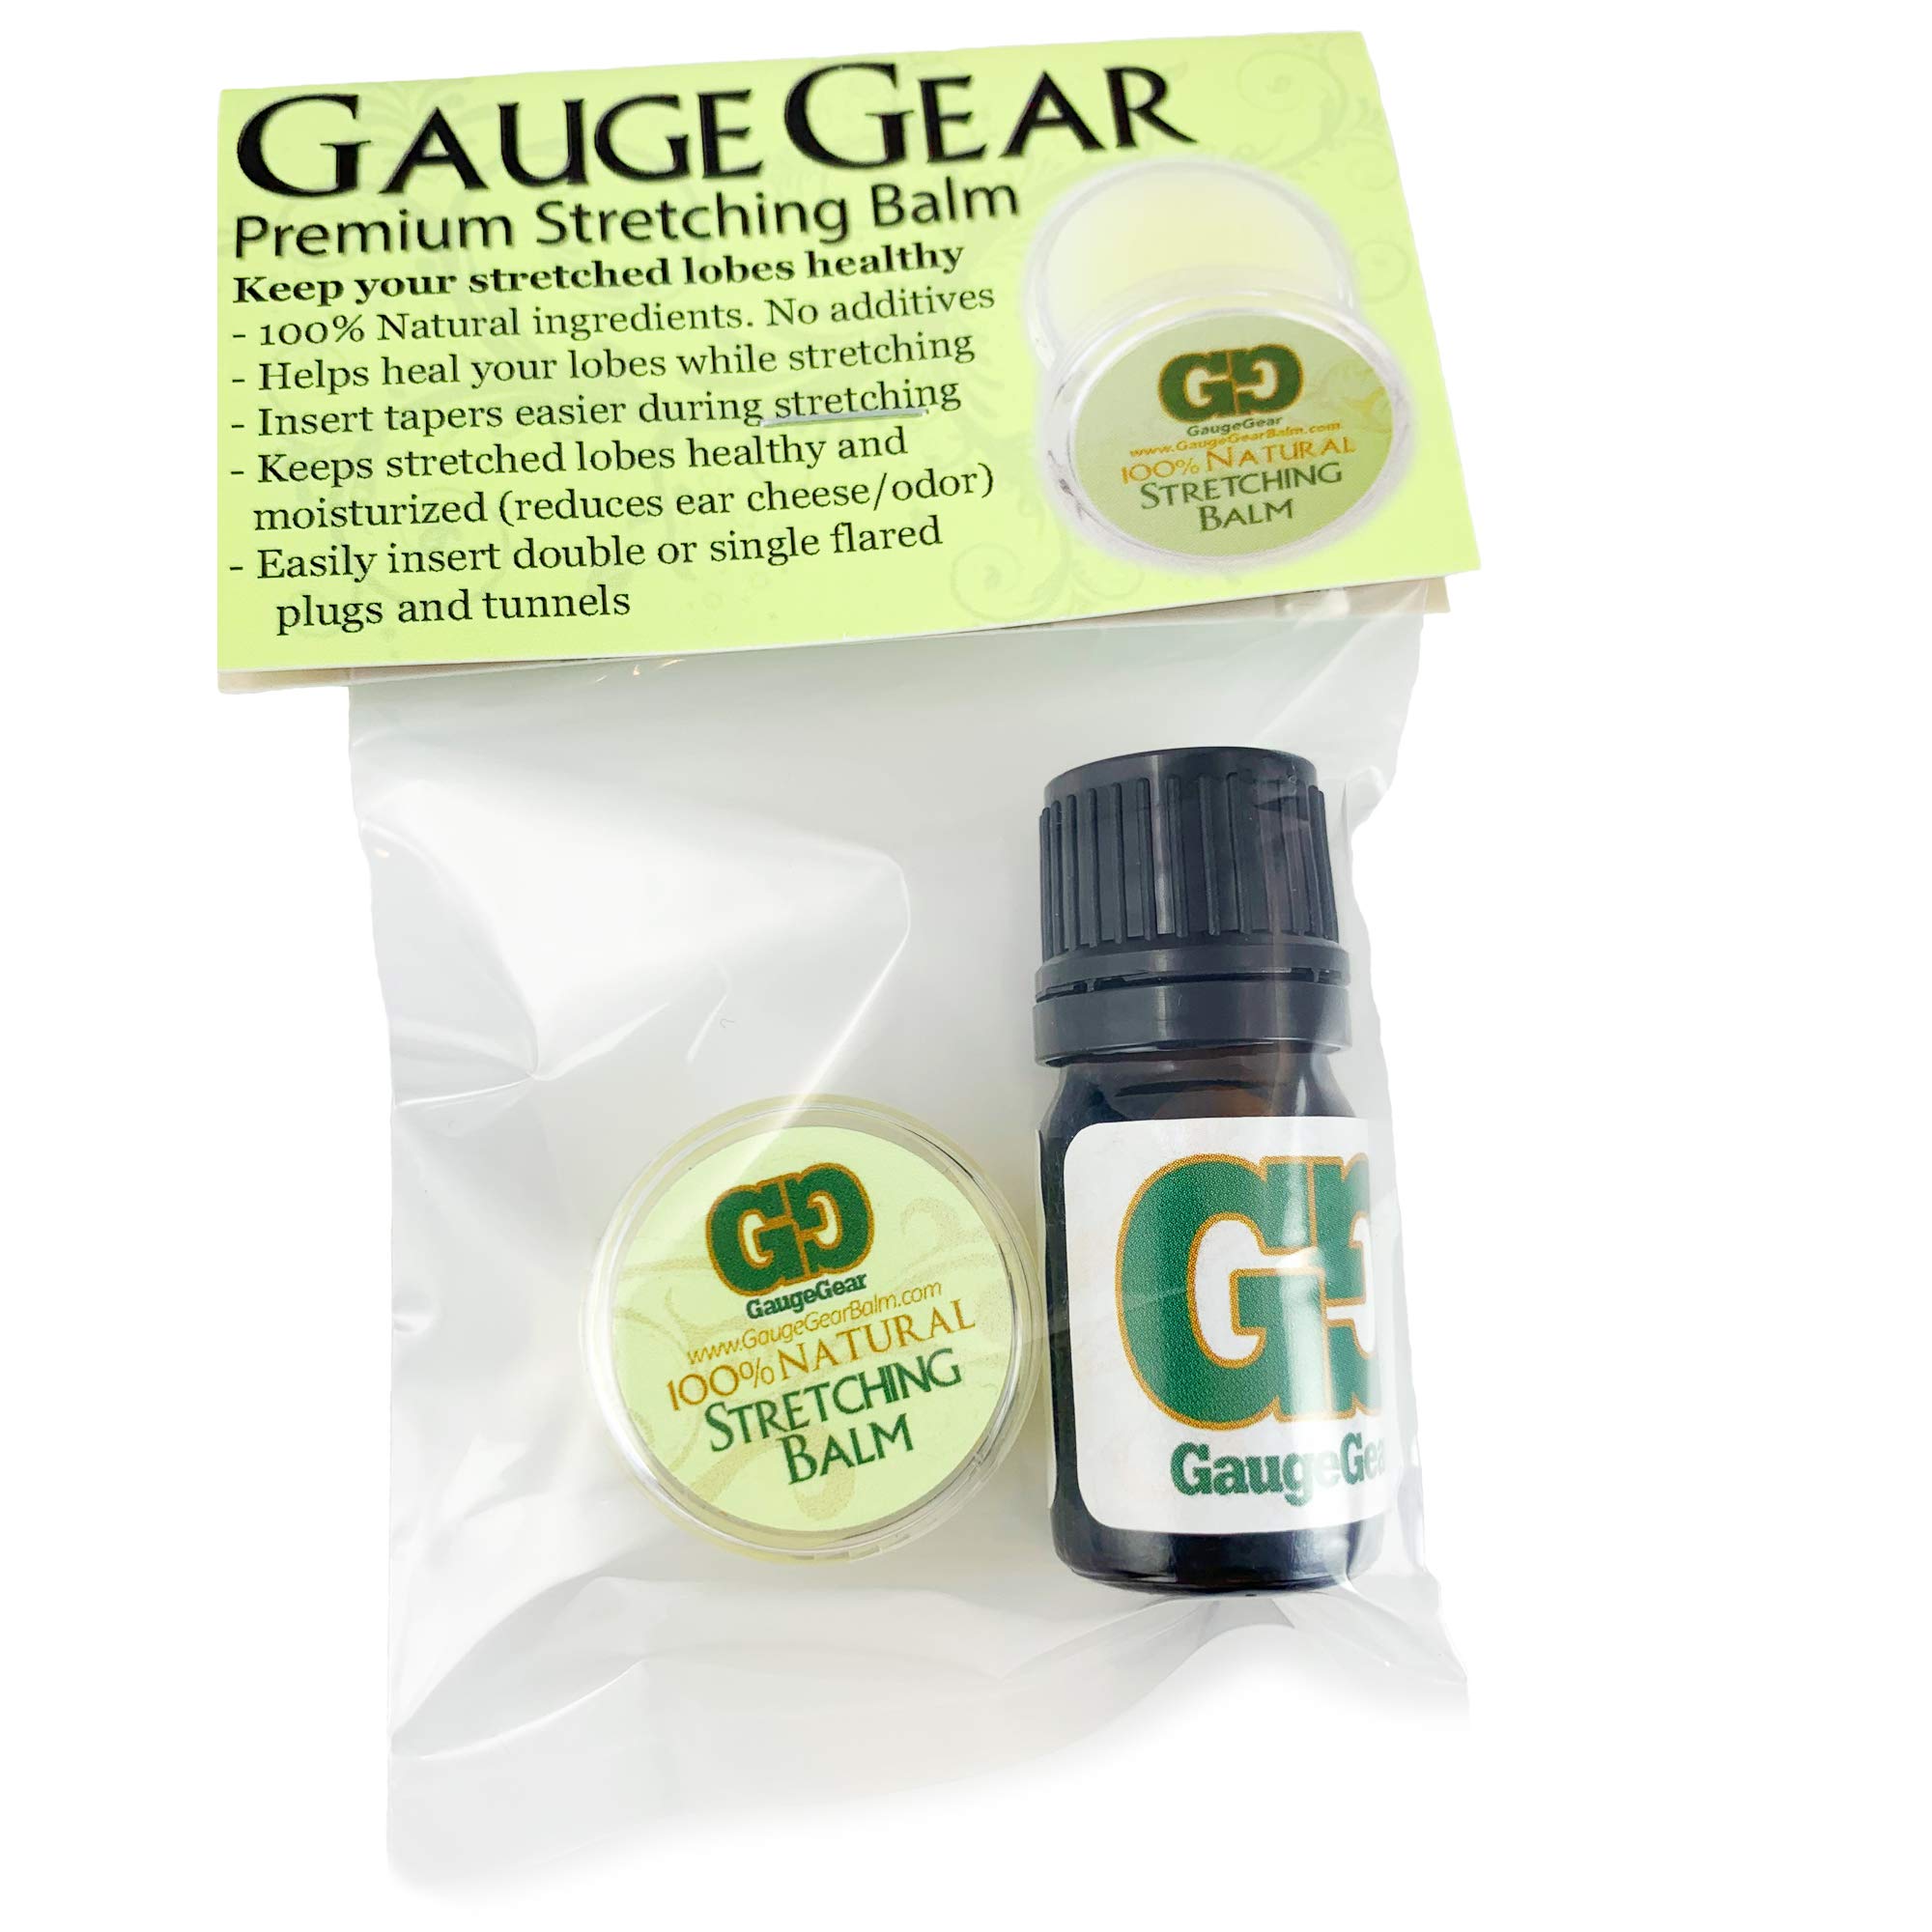 Gauge Gear Mini Balm & Blend Aftercare Set - 0.15 oz Ear Stretching Balm | 5 mL Daily Skin Conditioning Oil | All Natural Piercing Aftercare Kit |